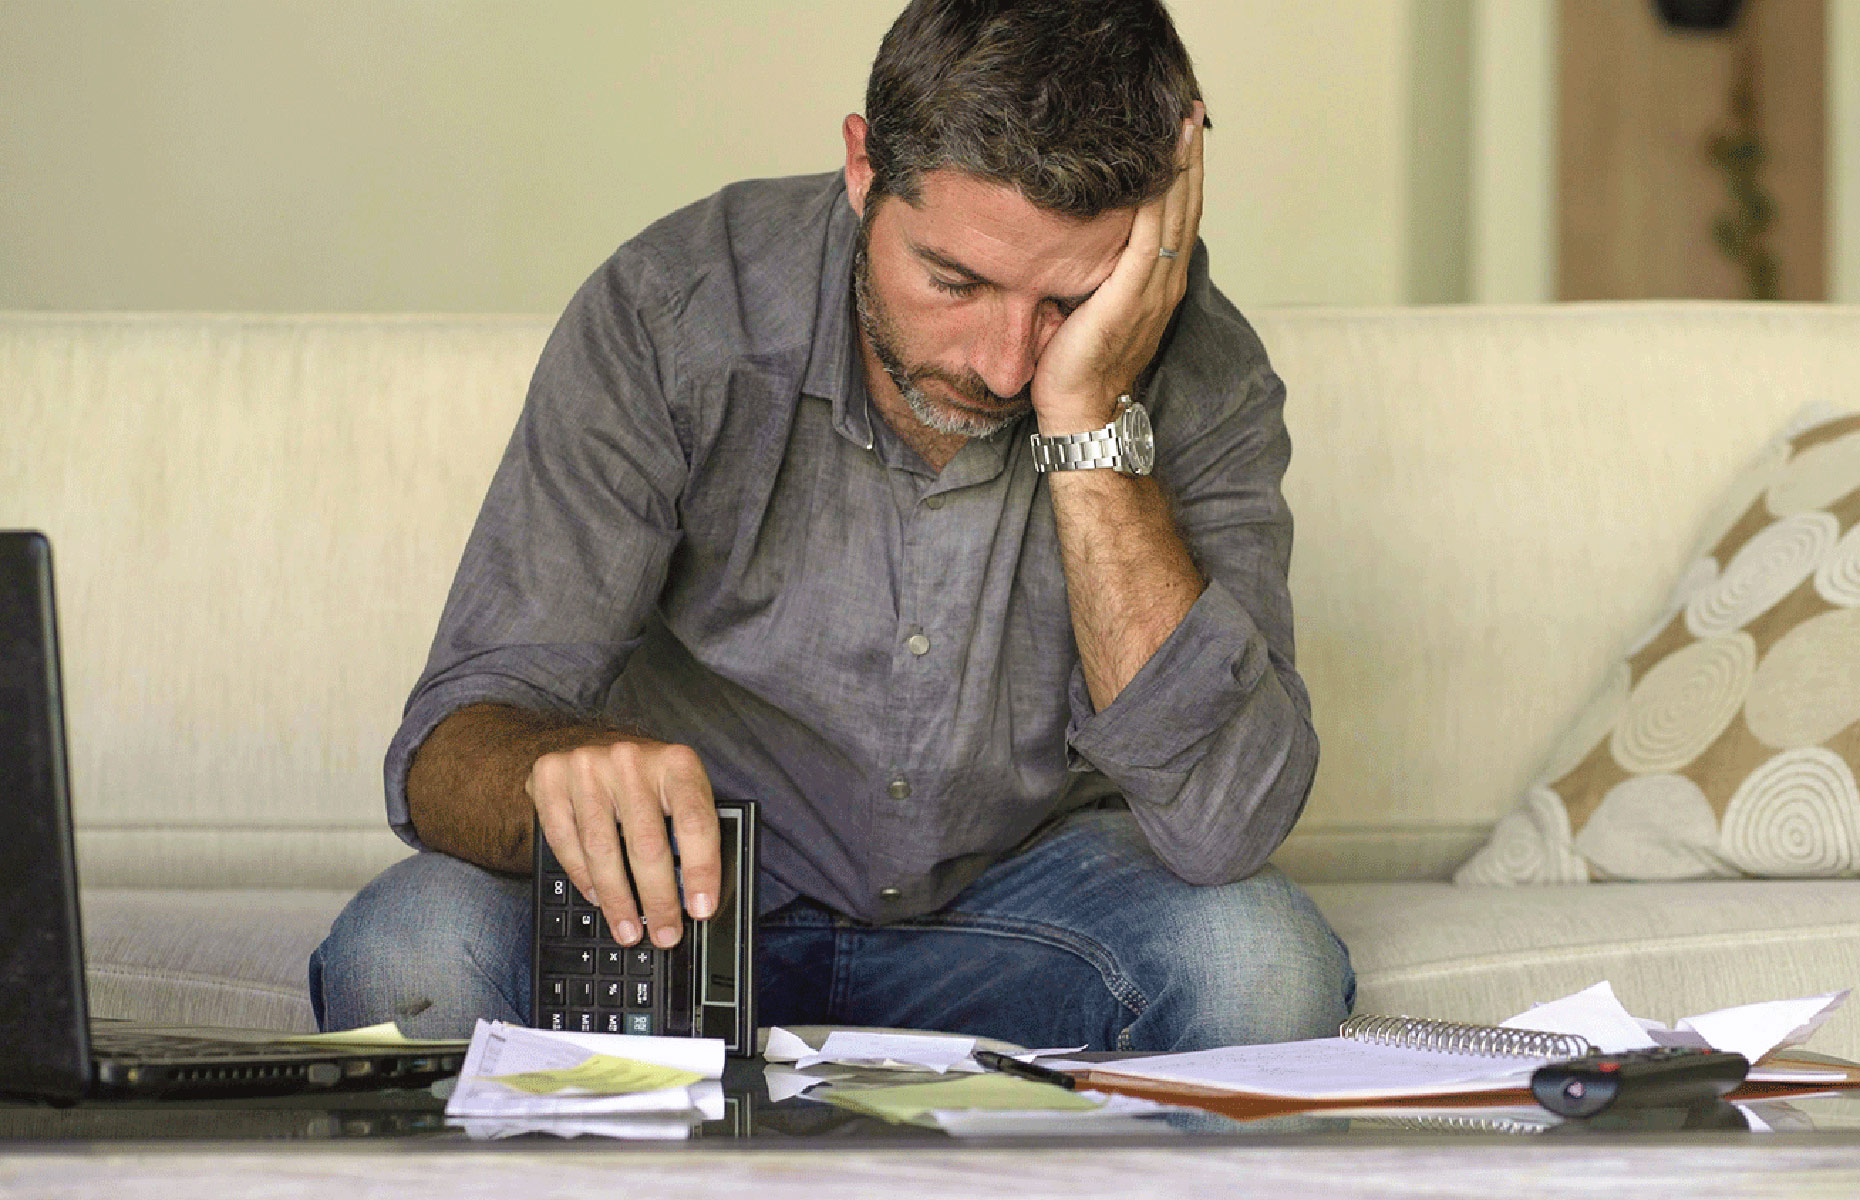 Man in grey shirt looking at mortgage papers